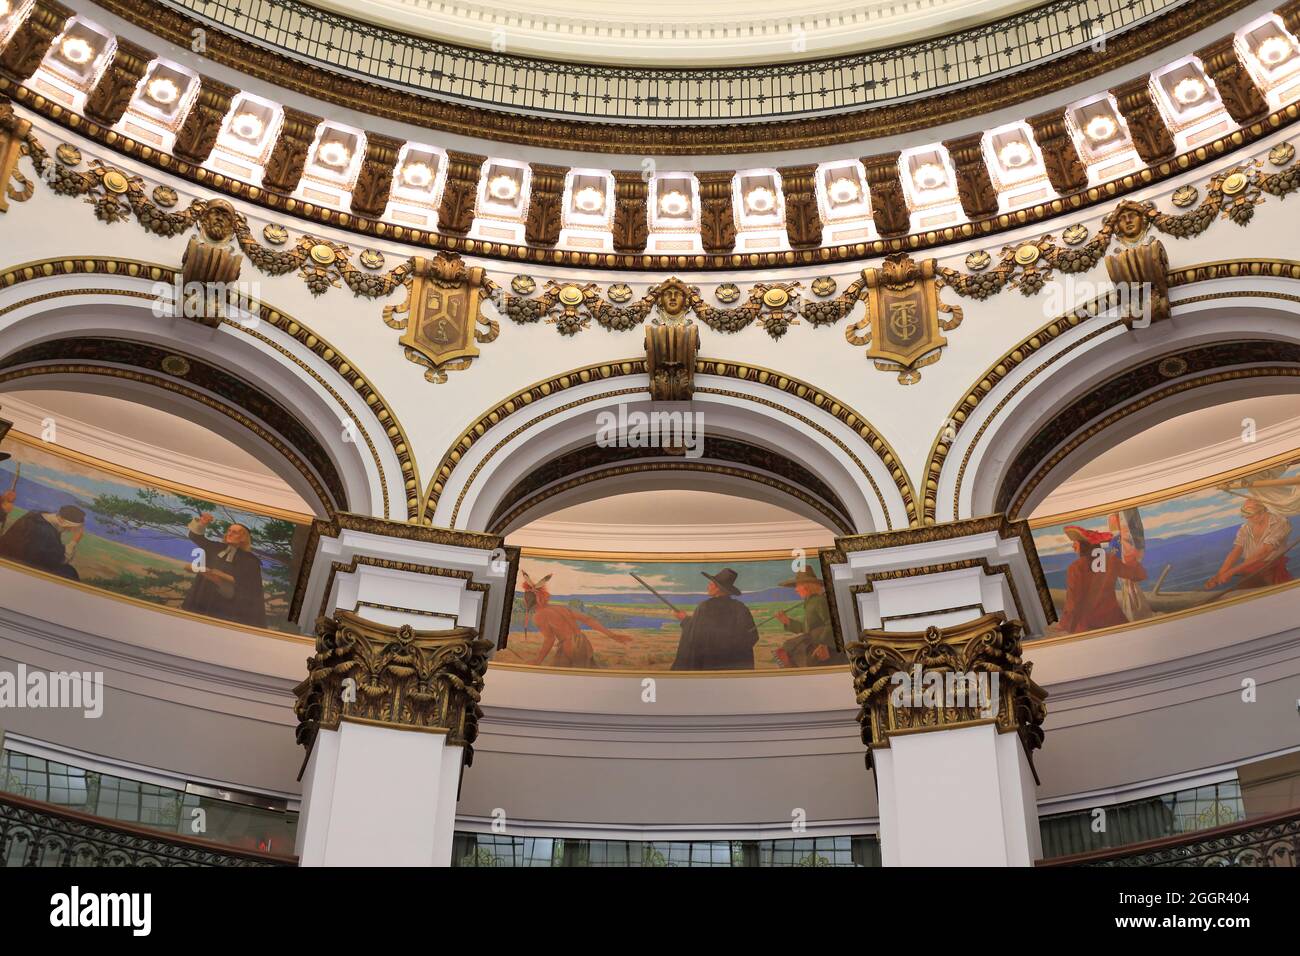 Murals decorating the rotunda of Heinen's Grocery Store the former Cleveland Trust Company Building in downtown Cleveland.Ohio.USA Stock Photo